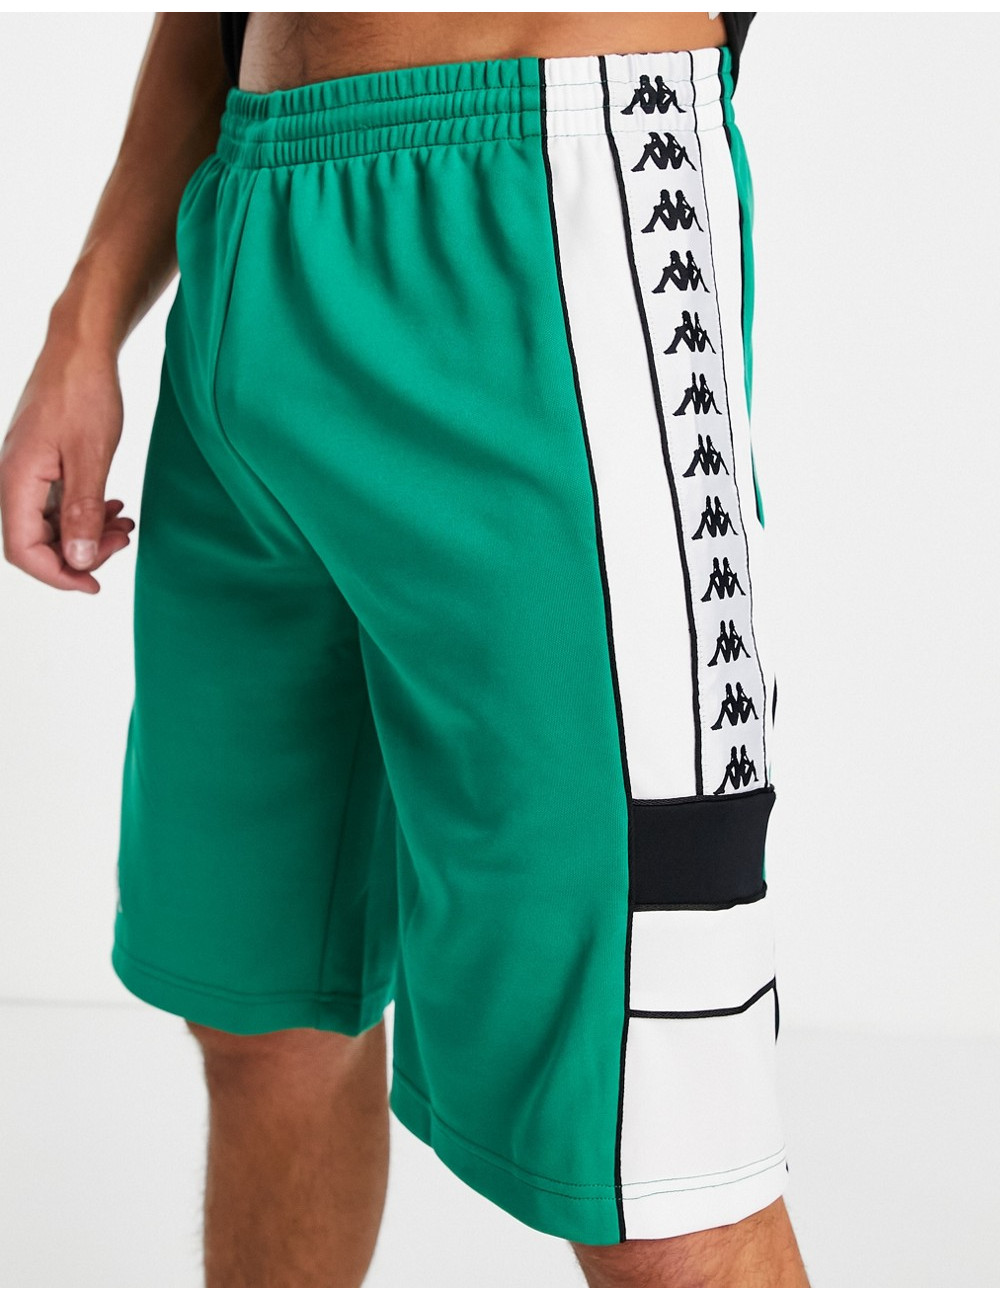 Kappa shorts with side tape...